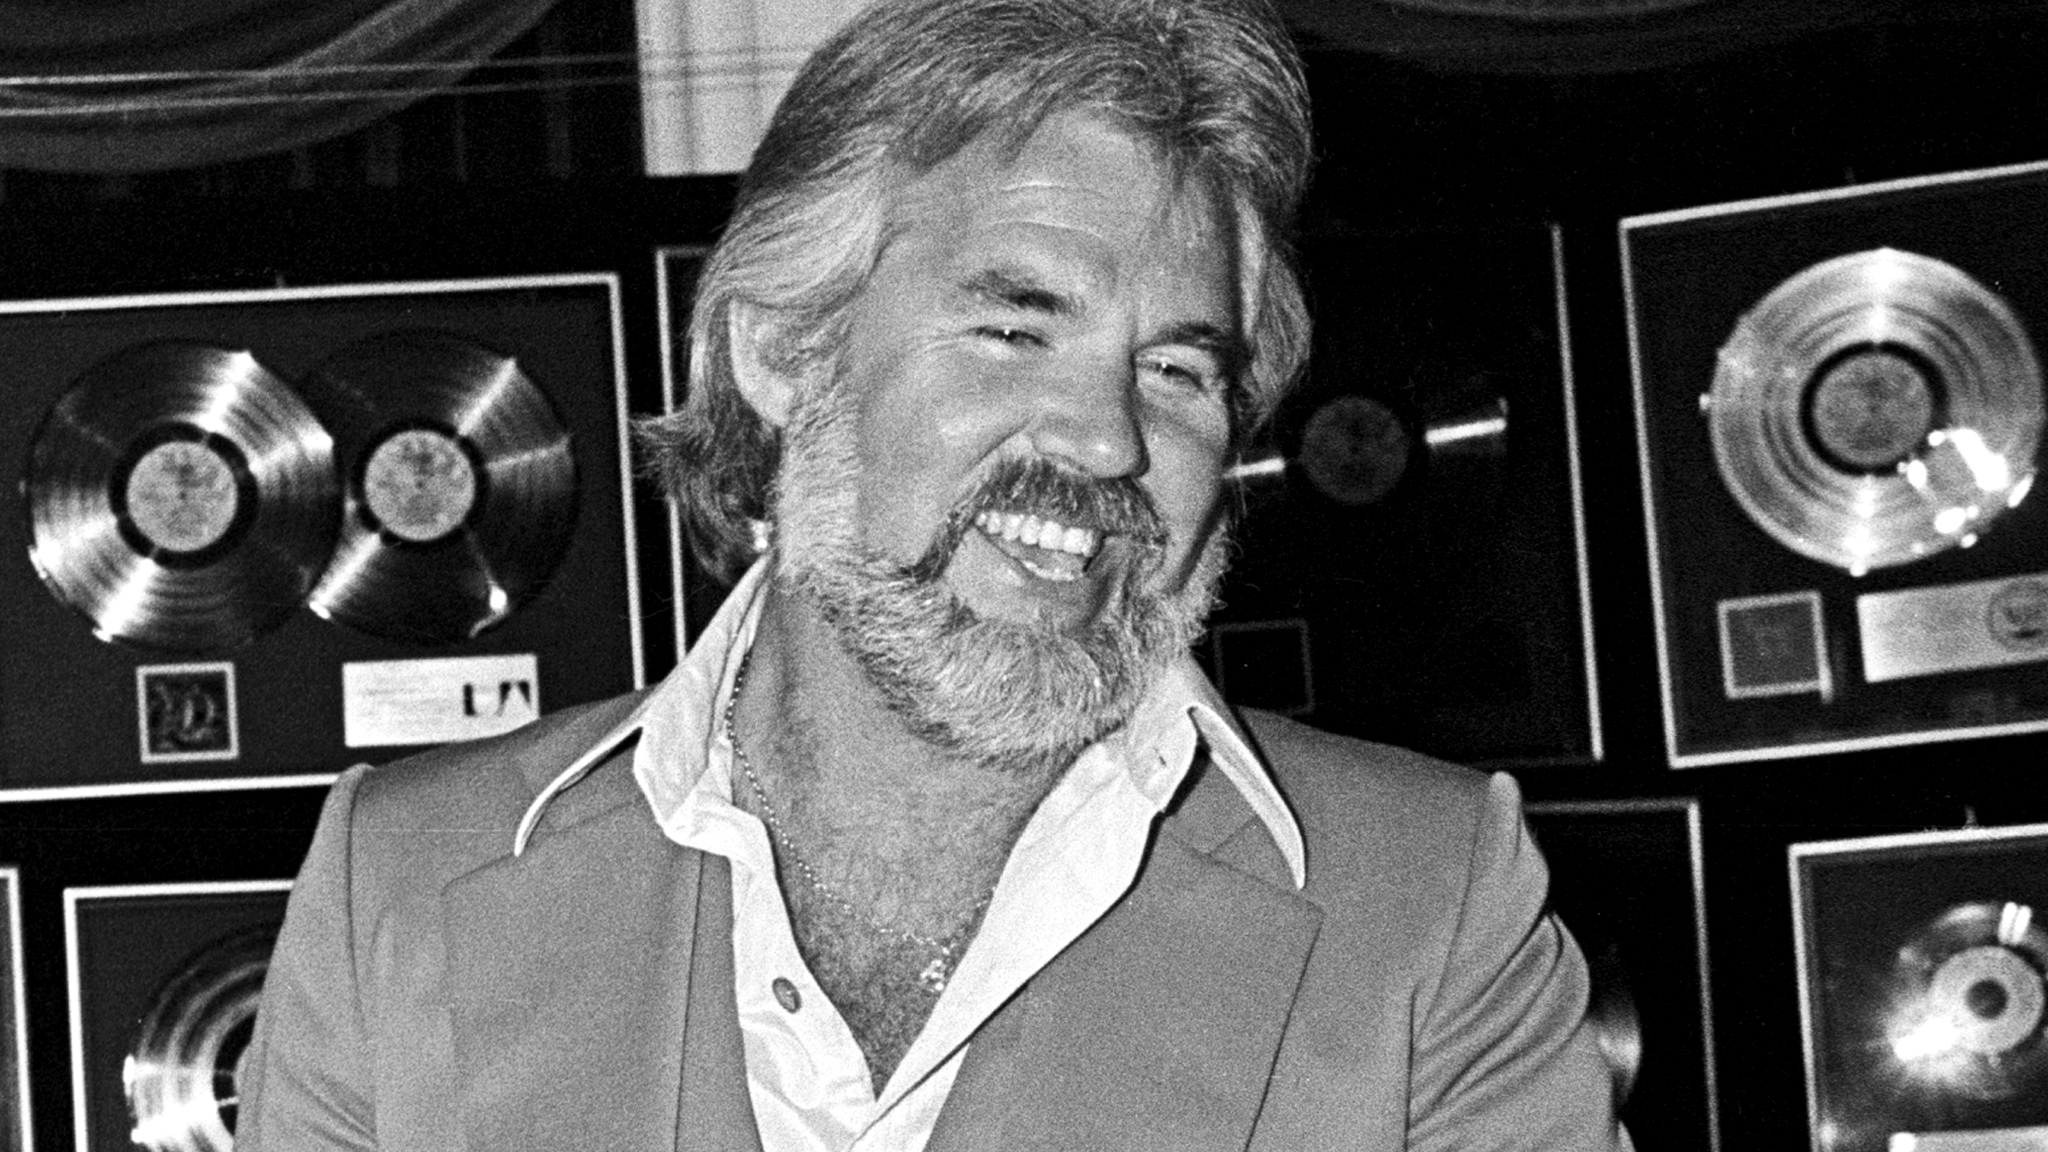 Kenny Rogers on Biography.com